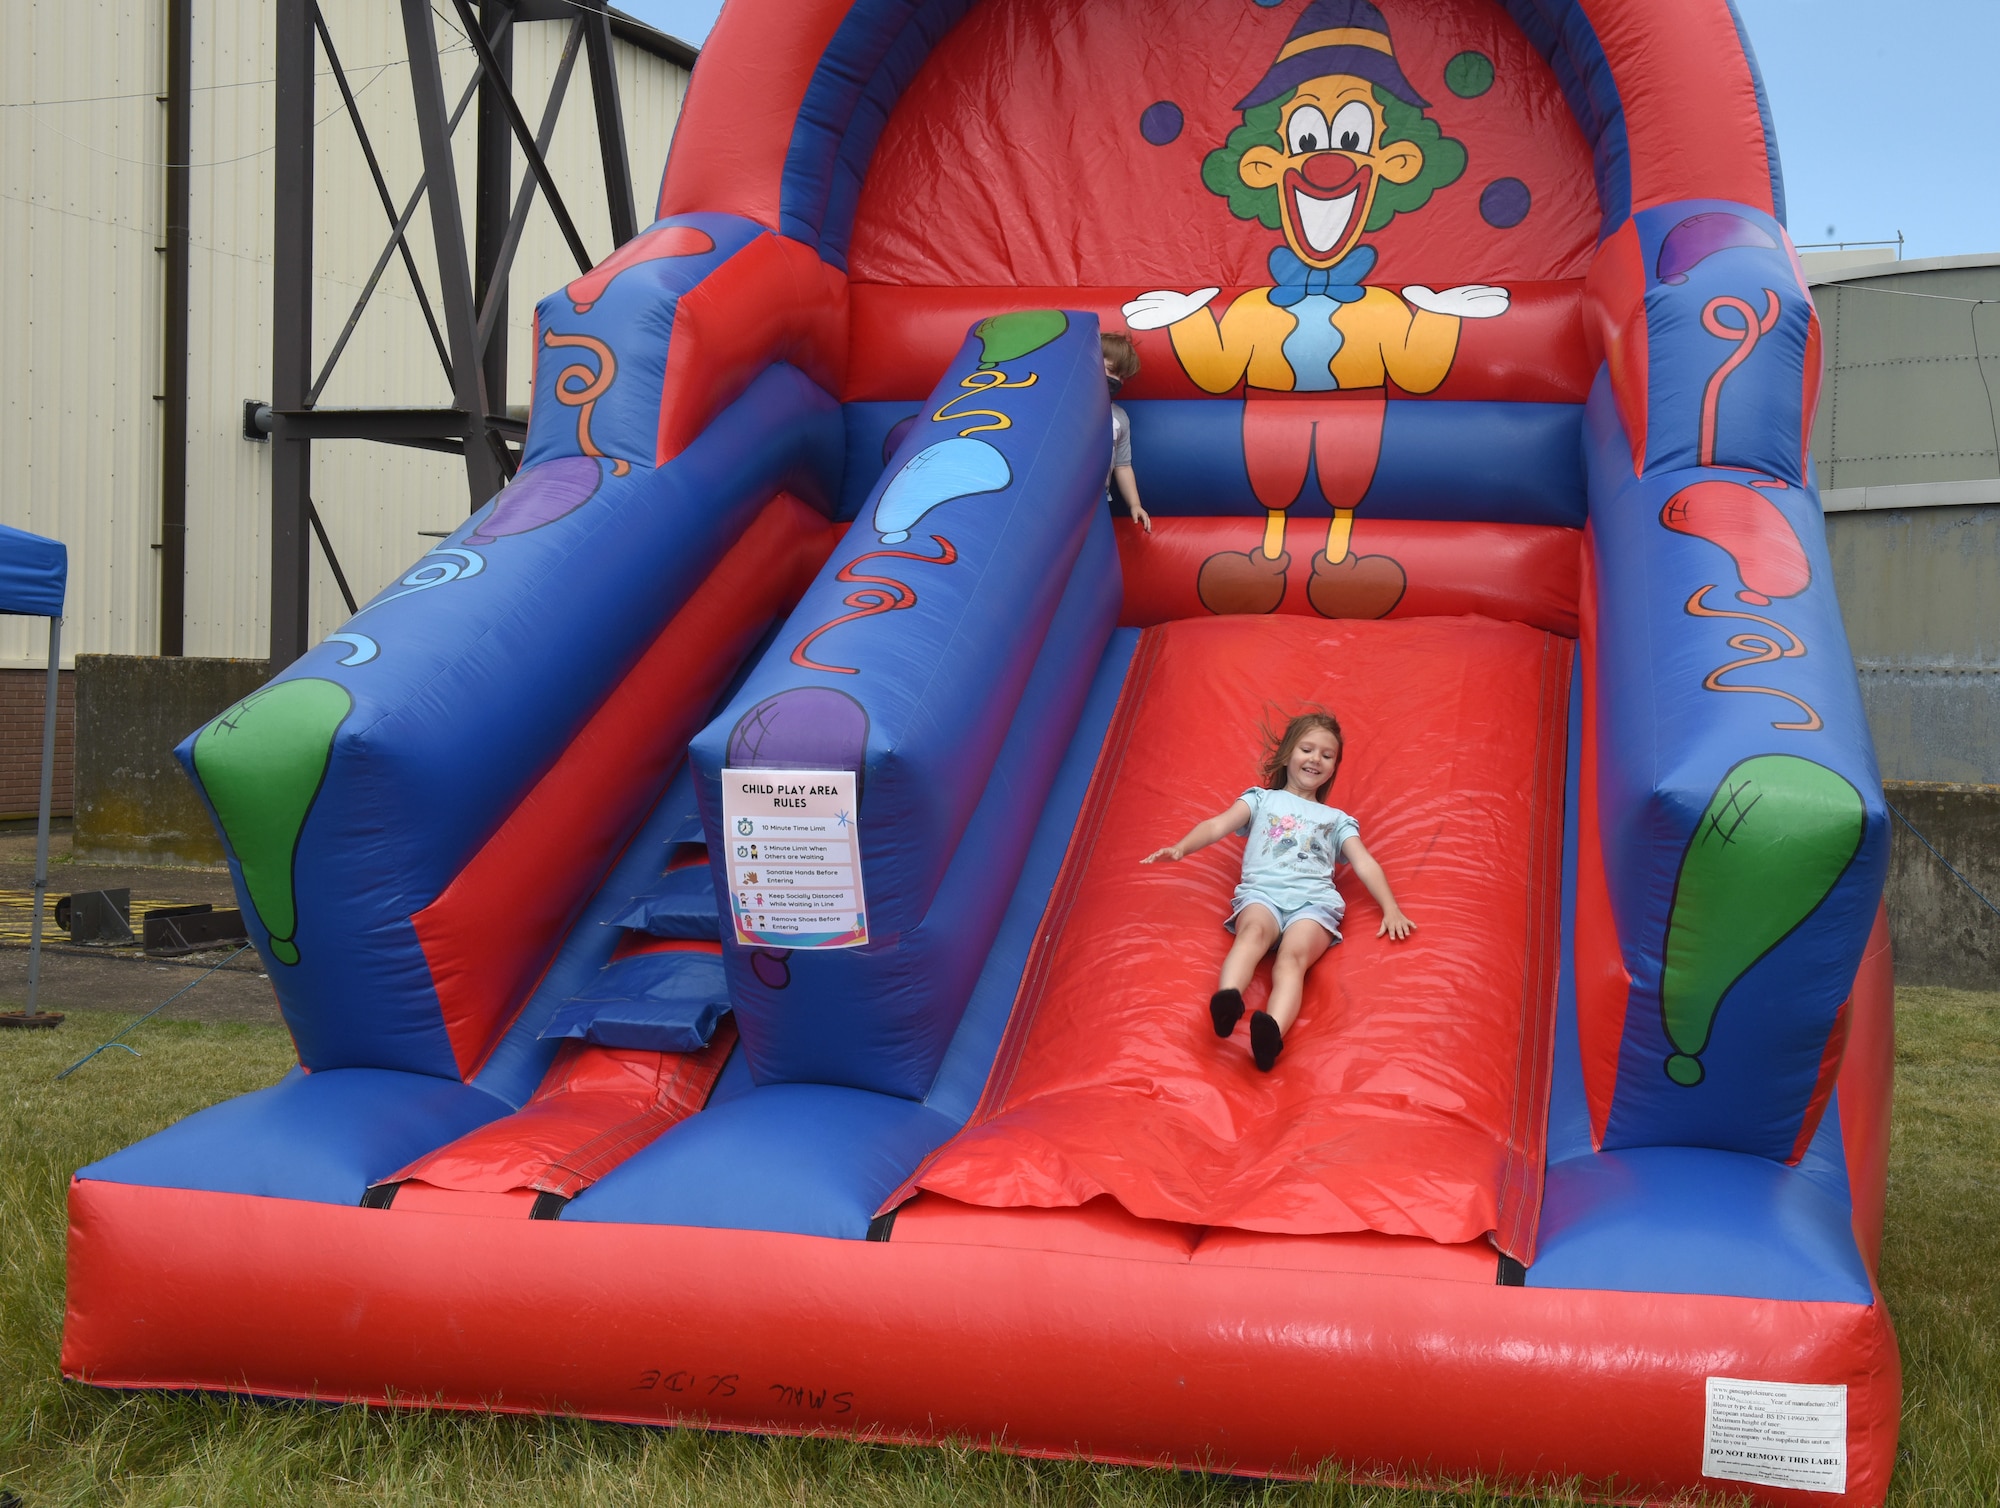 A Team Mildenhall child plays on a bouncy castle during the Diversity and Inclusion Day event at Royal Air Force Mildenhall, England, Aug. 13, 2021. The event included a variety of performances, food and informational booths, a fire truck, Humvee and various static aircraft. (U.S. Air Force photo by Karen Abeyasekere)